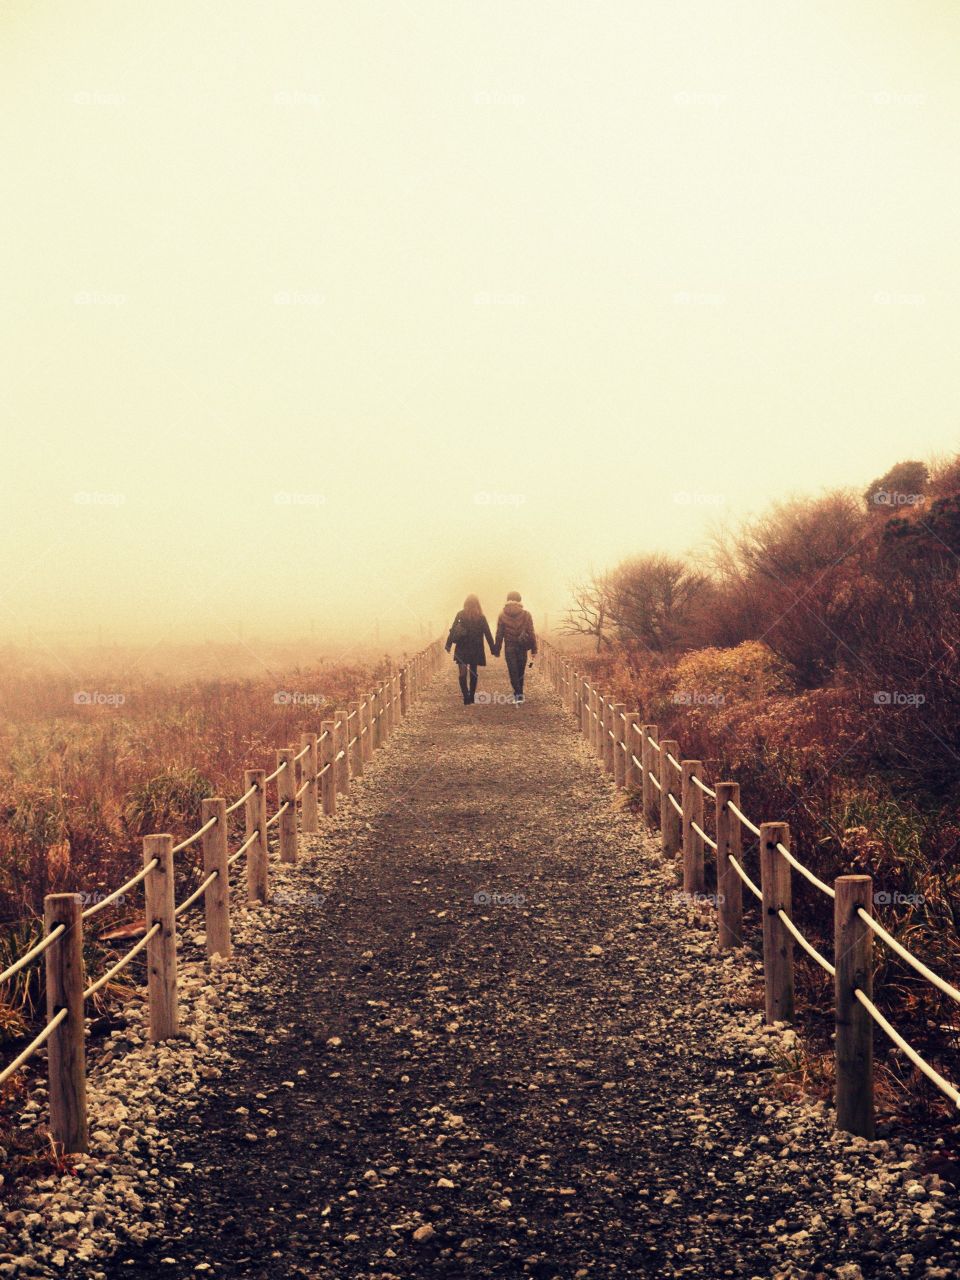 Couple in the Mist